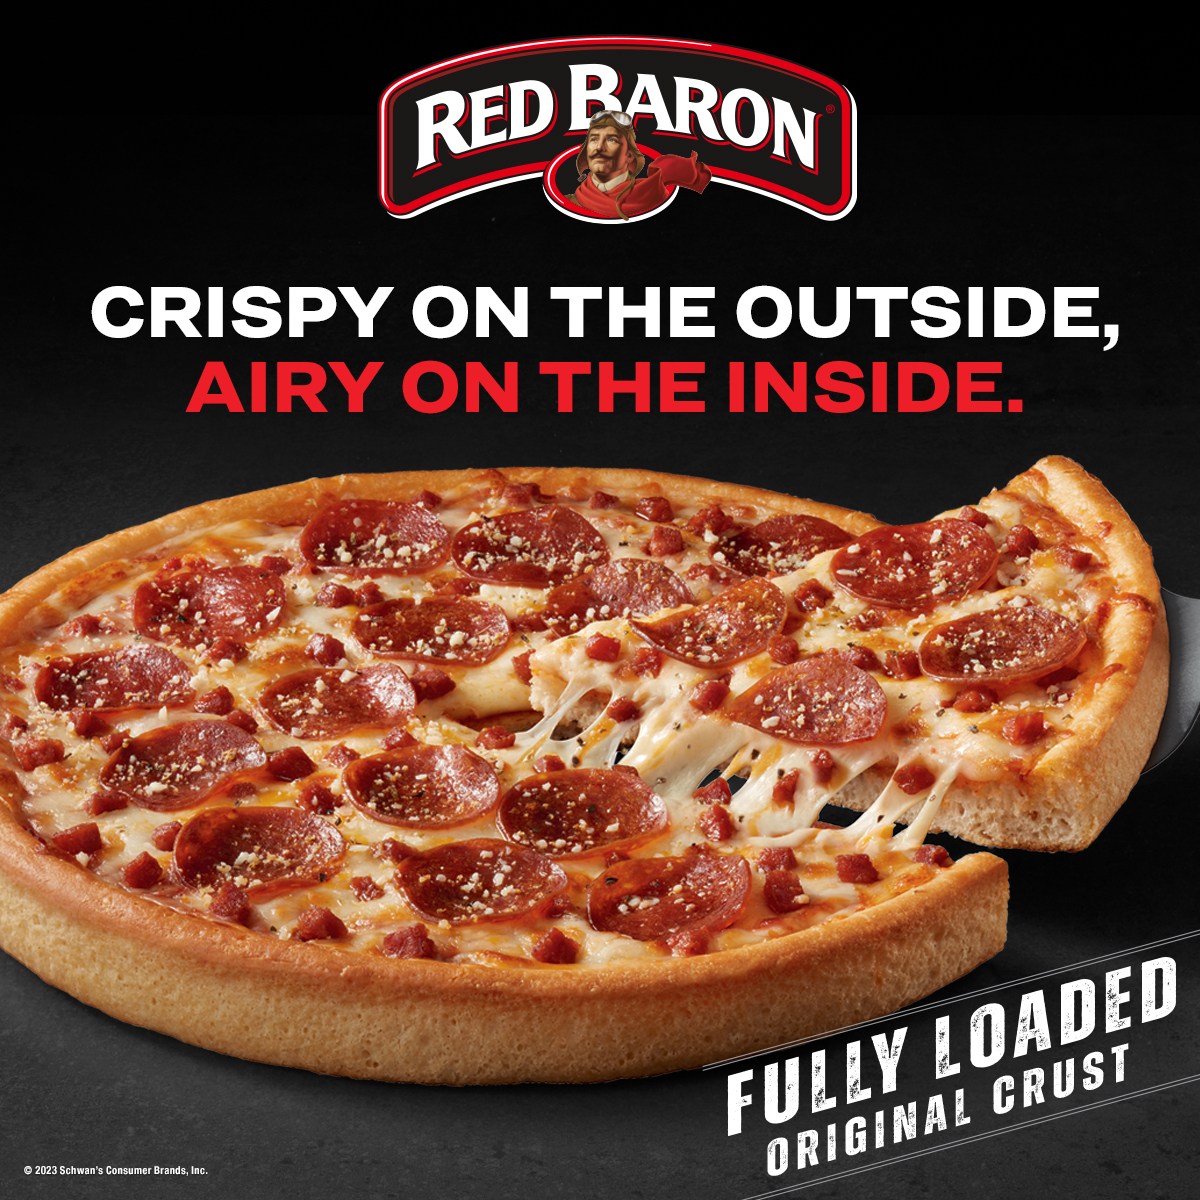 Crispy on the outside, airy on the inside.